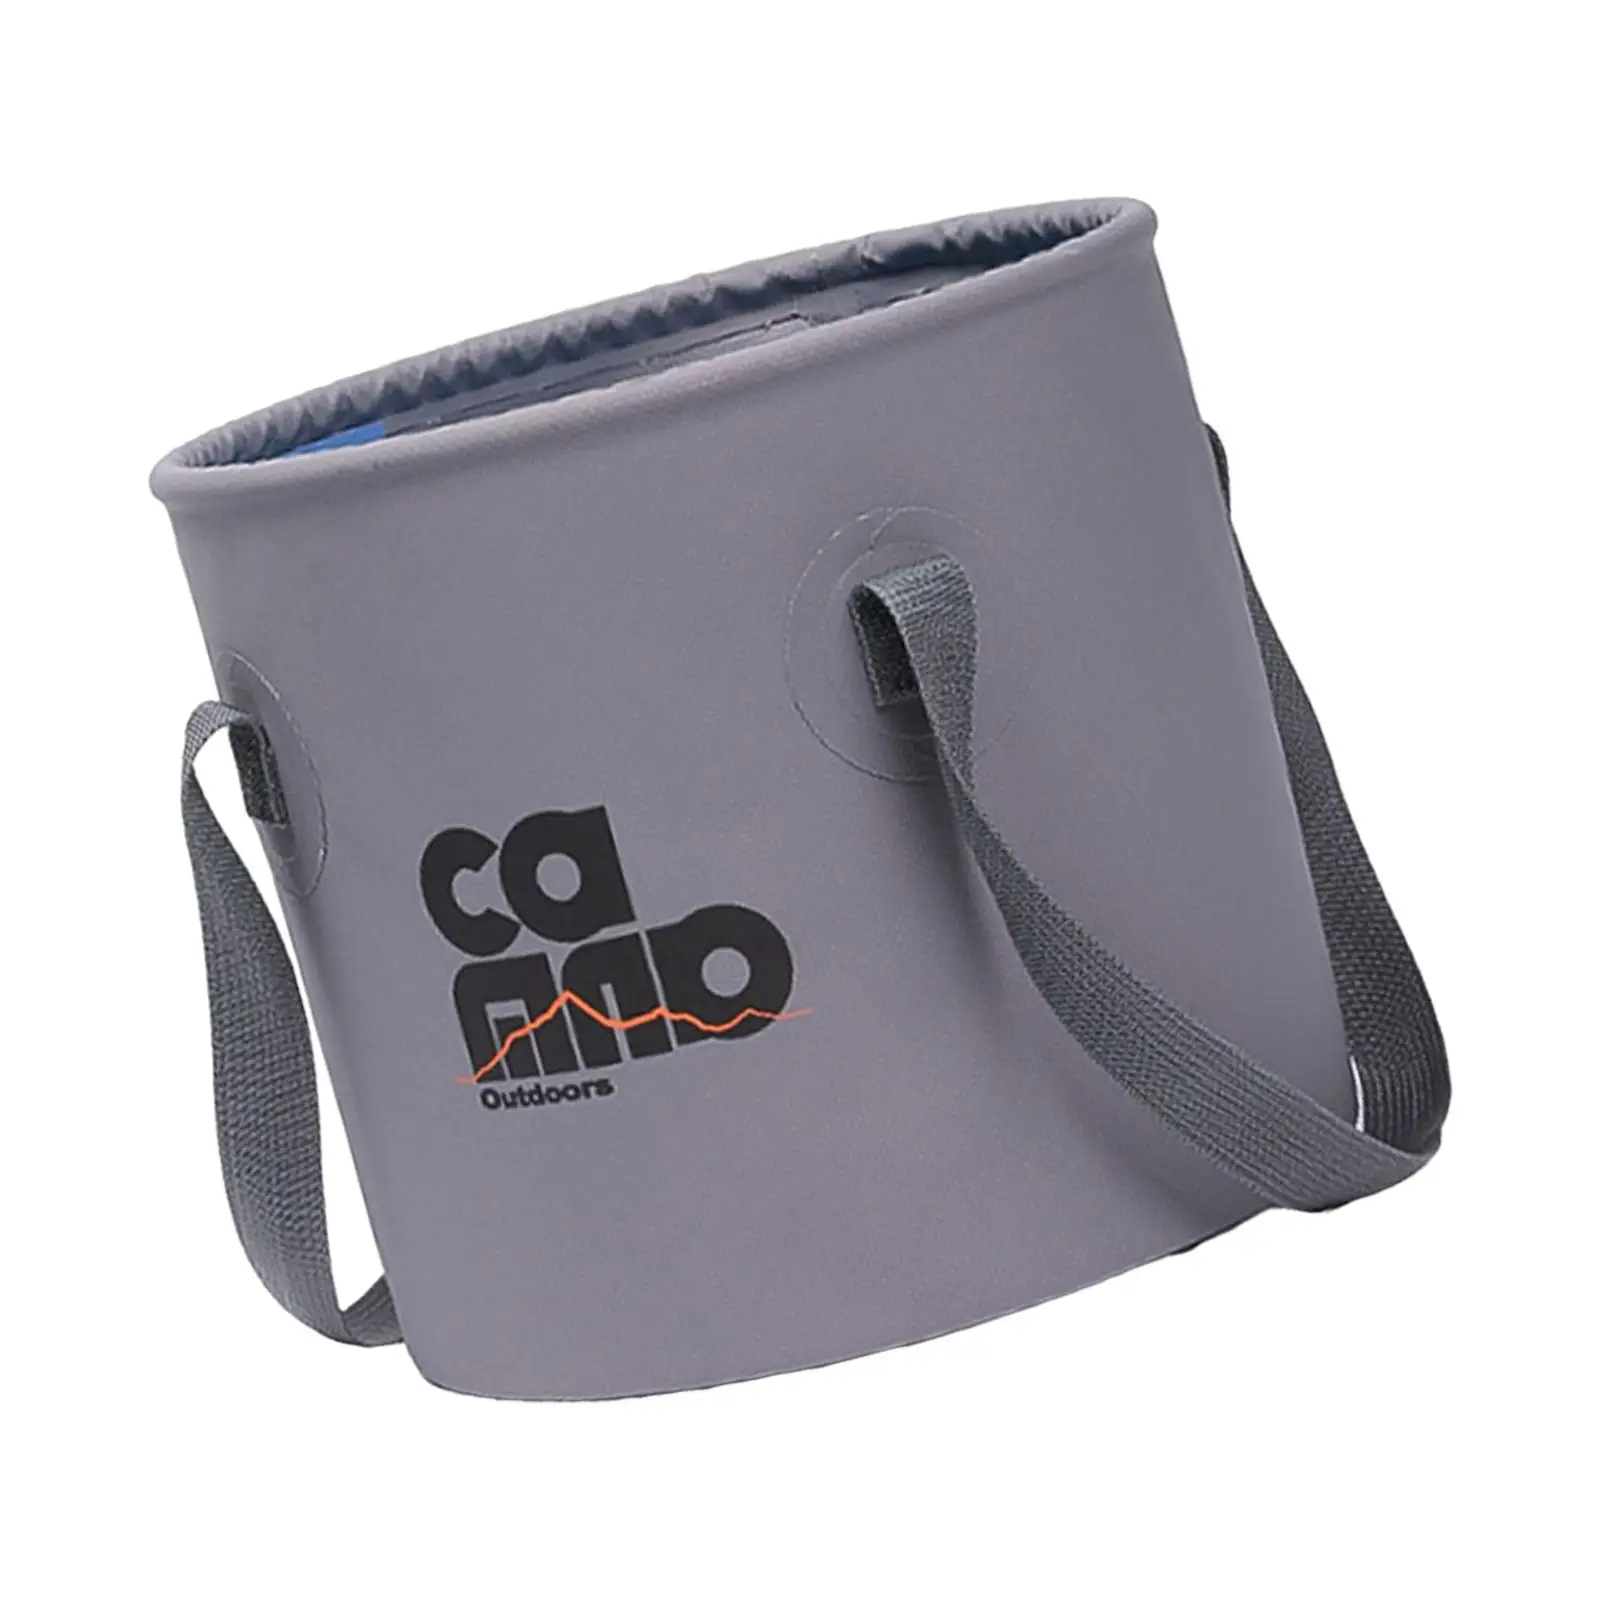 Collapsible Bucket Foldable High Temperature Resistance for Fishing Travel